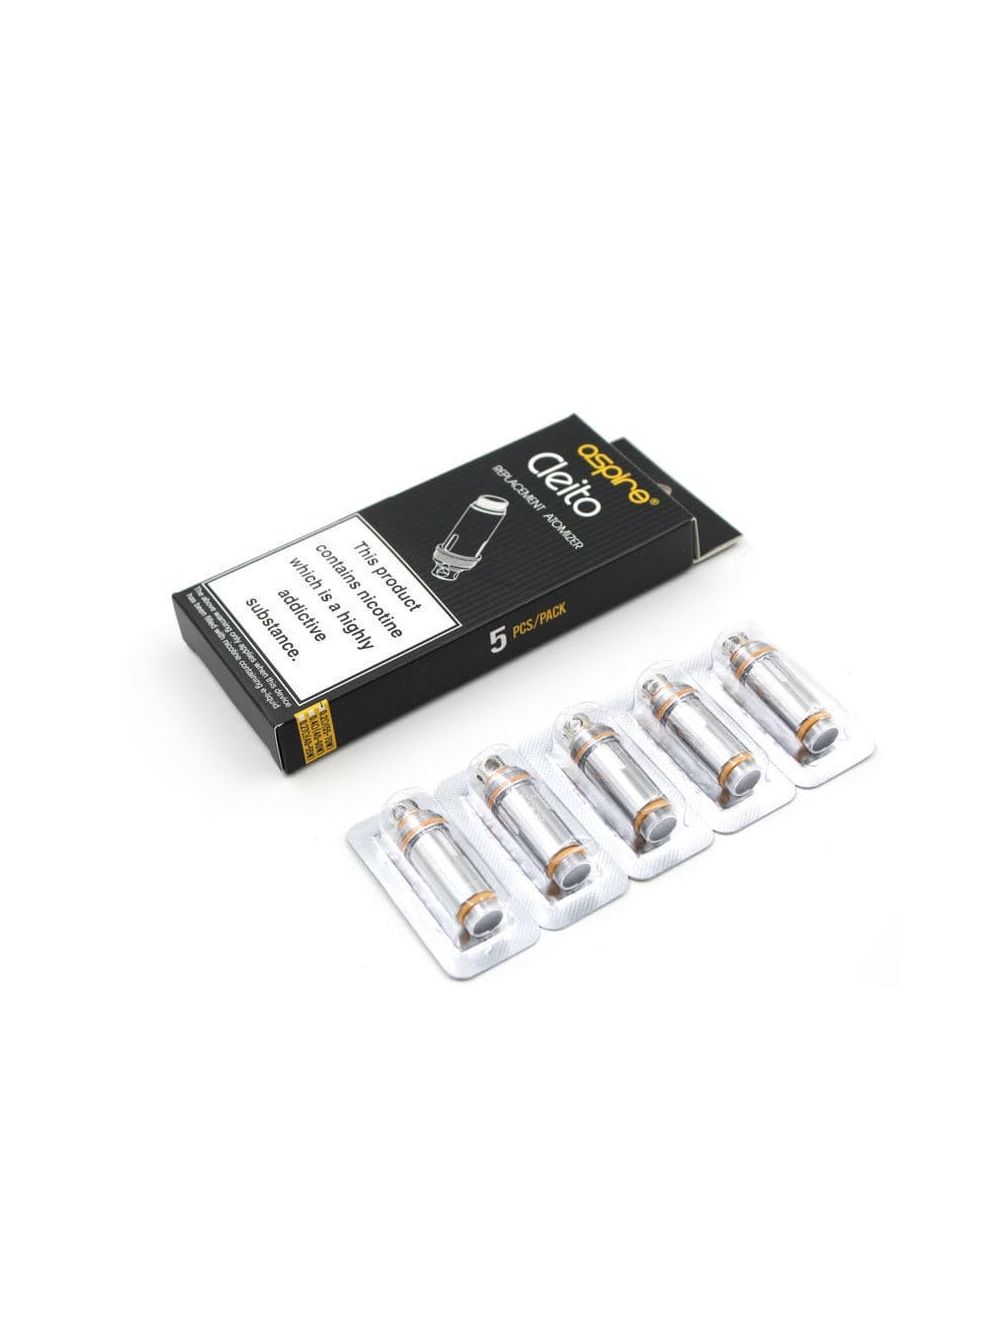 ASPIRE Cleito Replacement Coils Heads